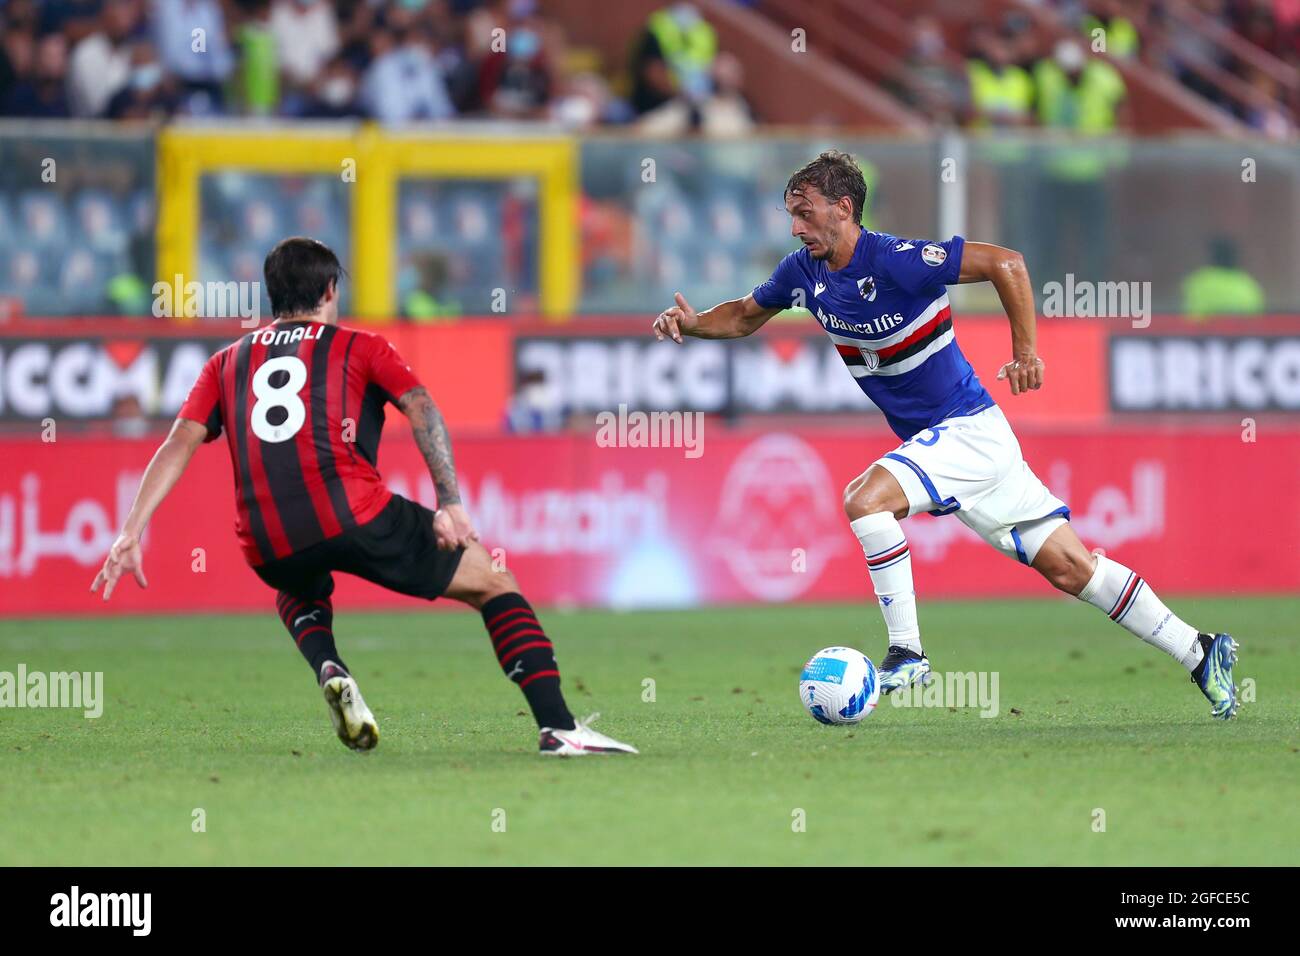 Chance of goal for Manolo Gabbiadini of UC Sampdoria during the Serie  News Photo - Getty Images